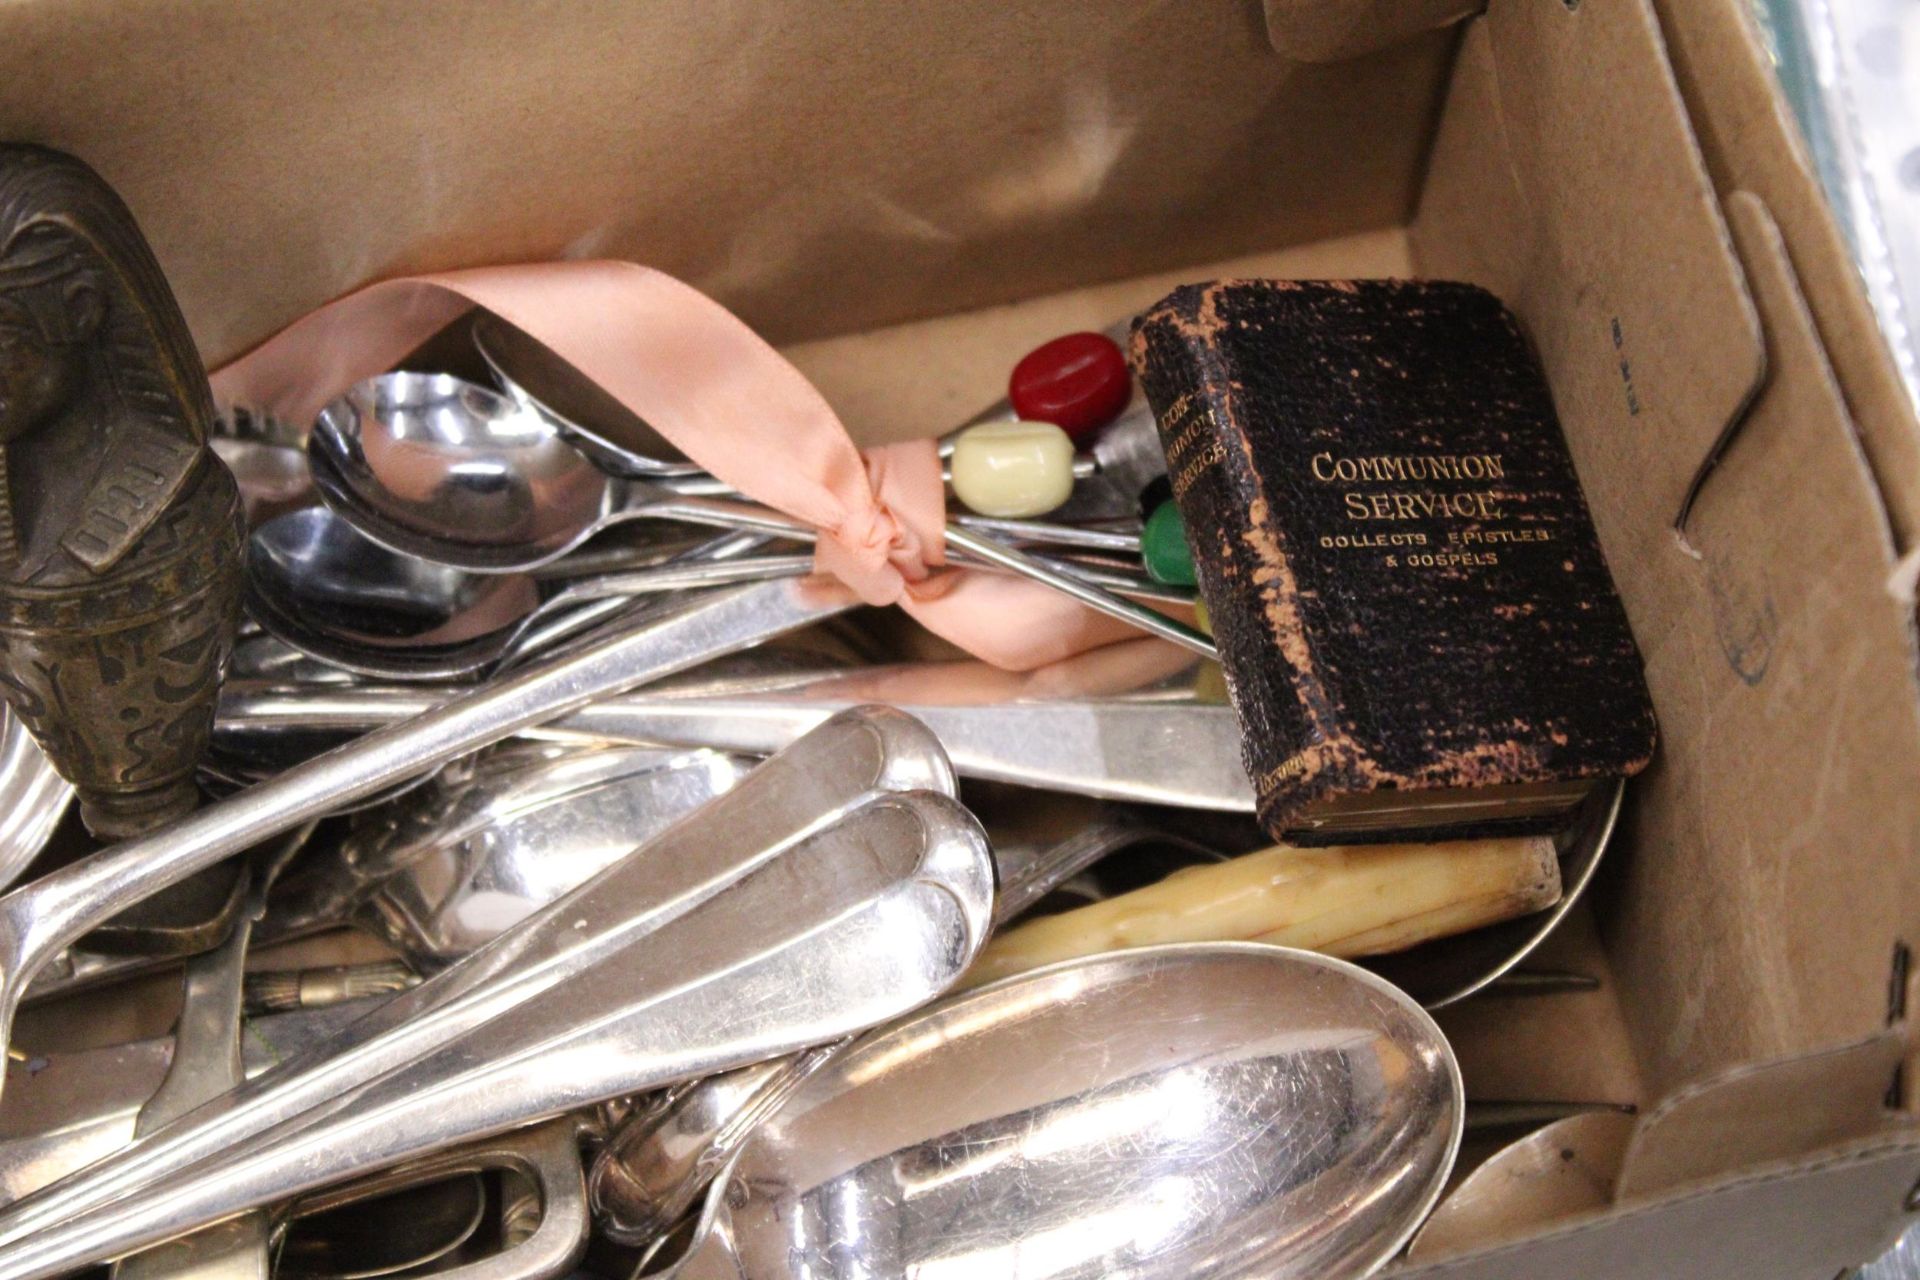 A QUANTITY OF VINTAGE FLATWARE TO INCLUDE LADELS, MUFFIN FORK, SUGAR SIFTERS, SPOONS, ETC - Image 4 of 5